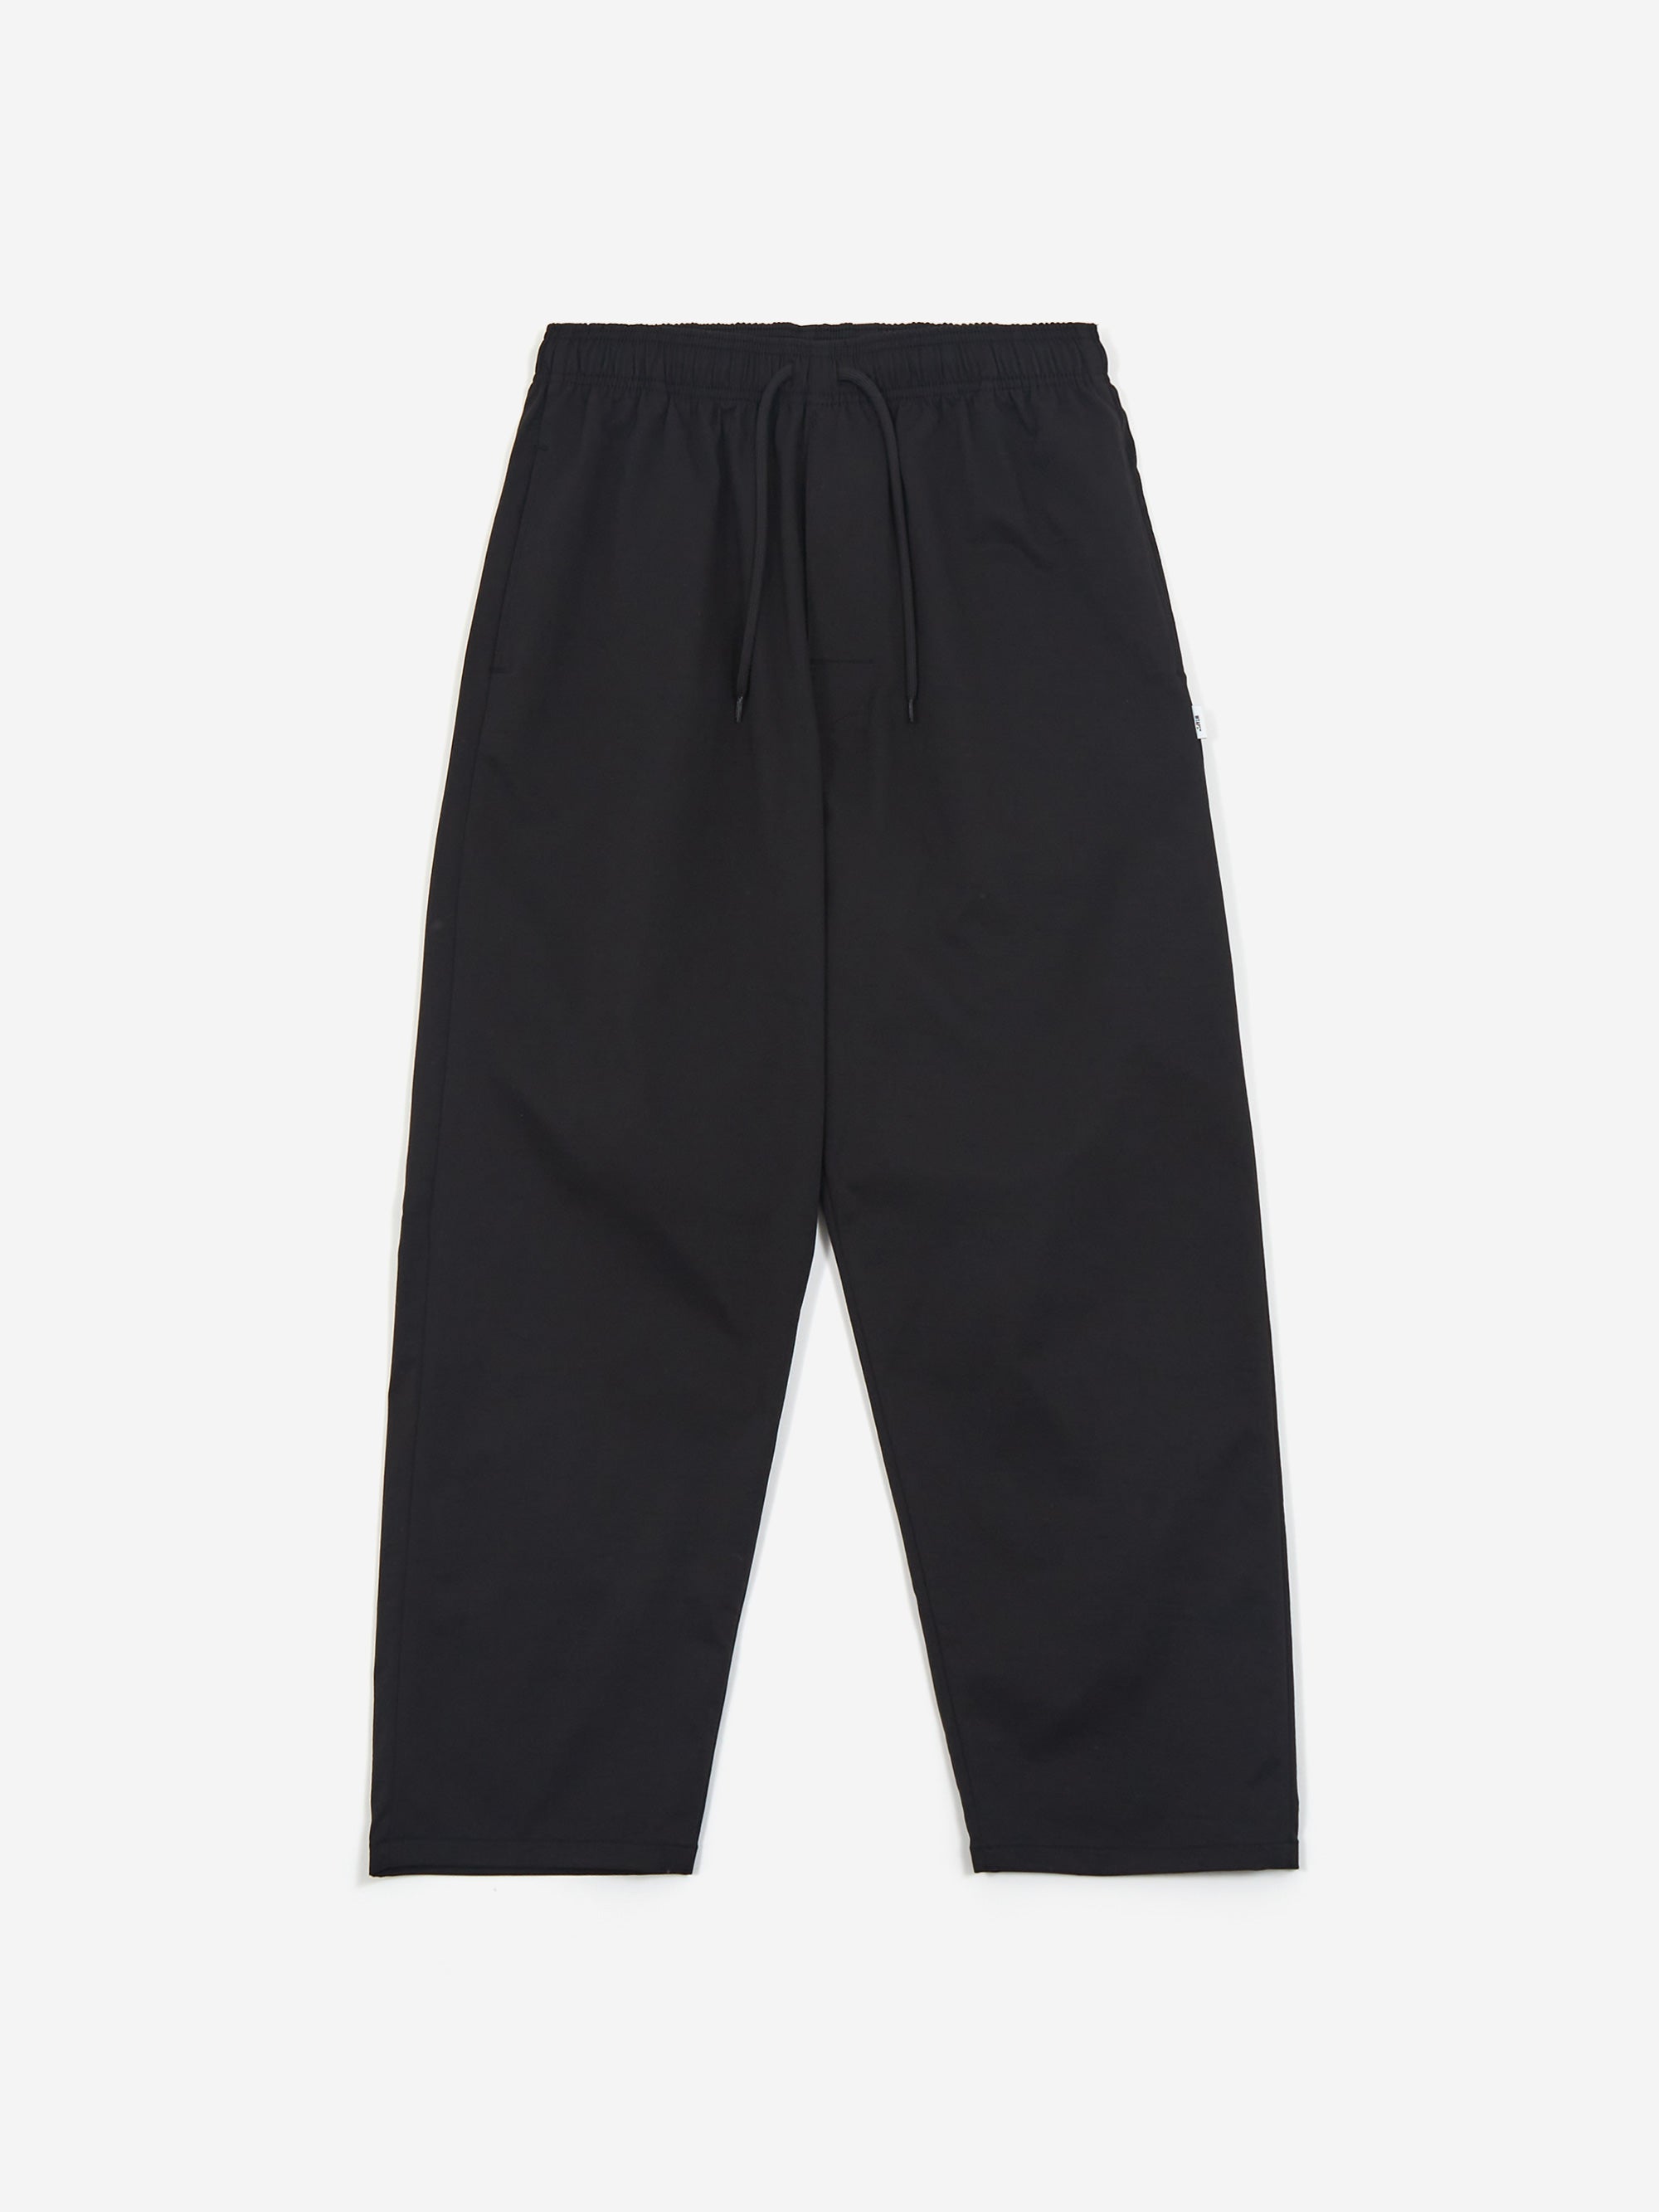 WTAPS Seagull 01 / Trousers / Poly. Twill - Black